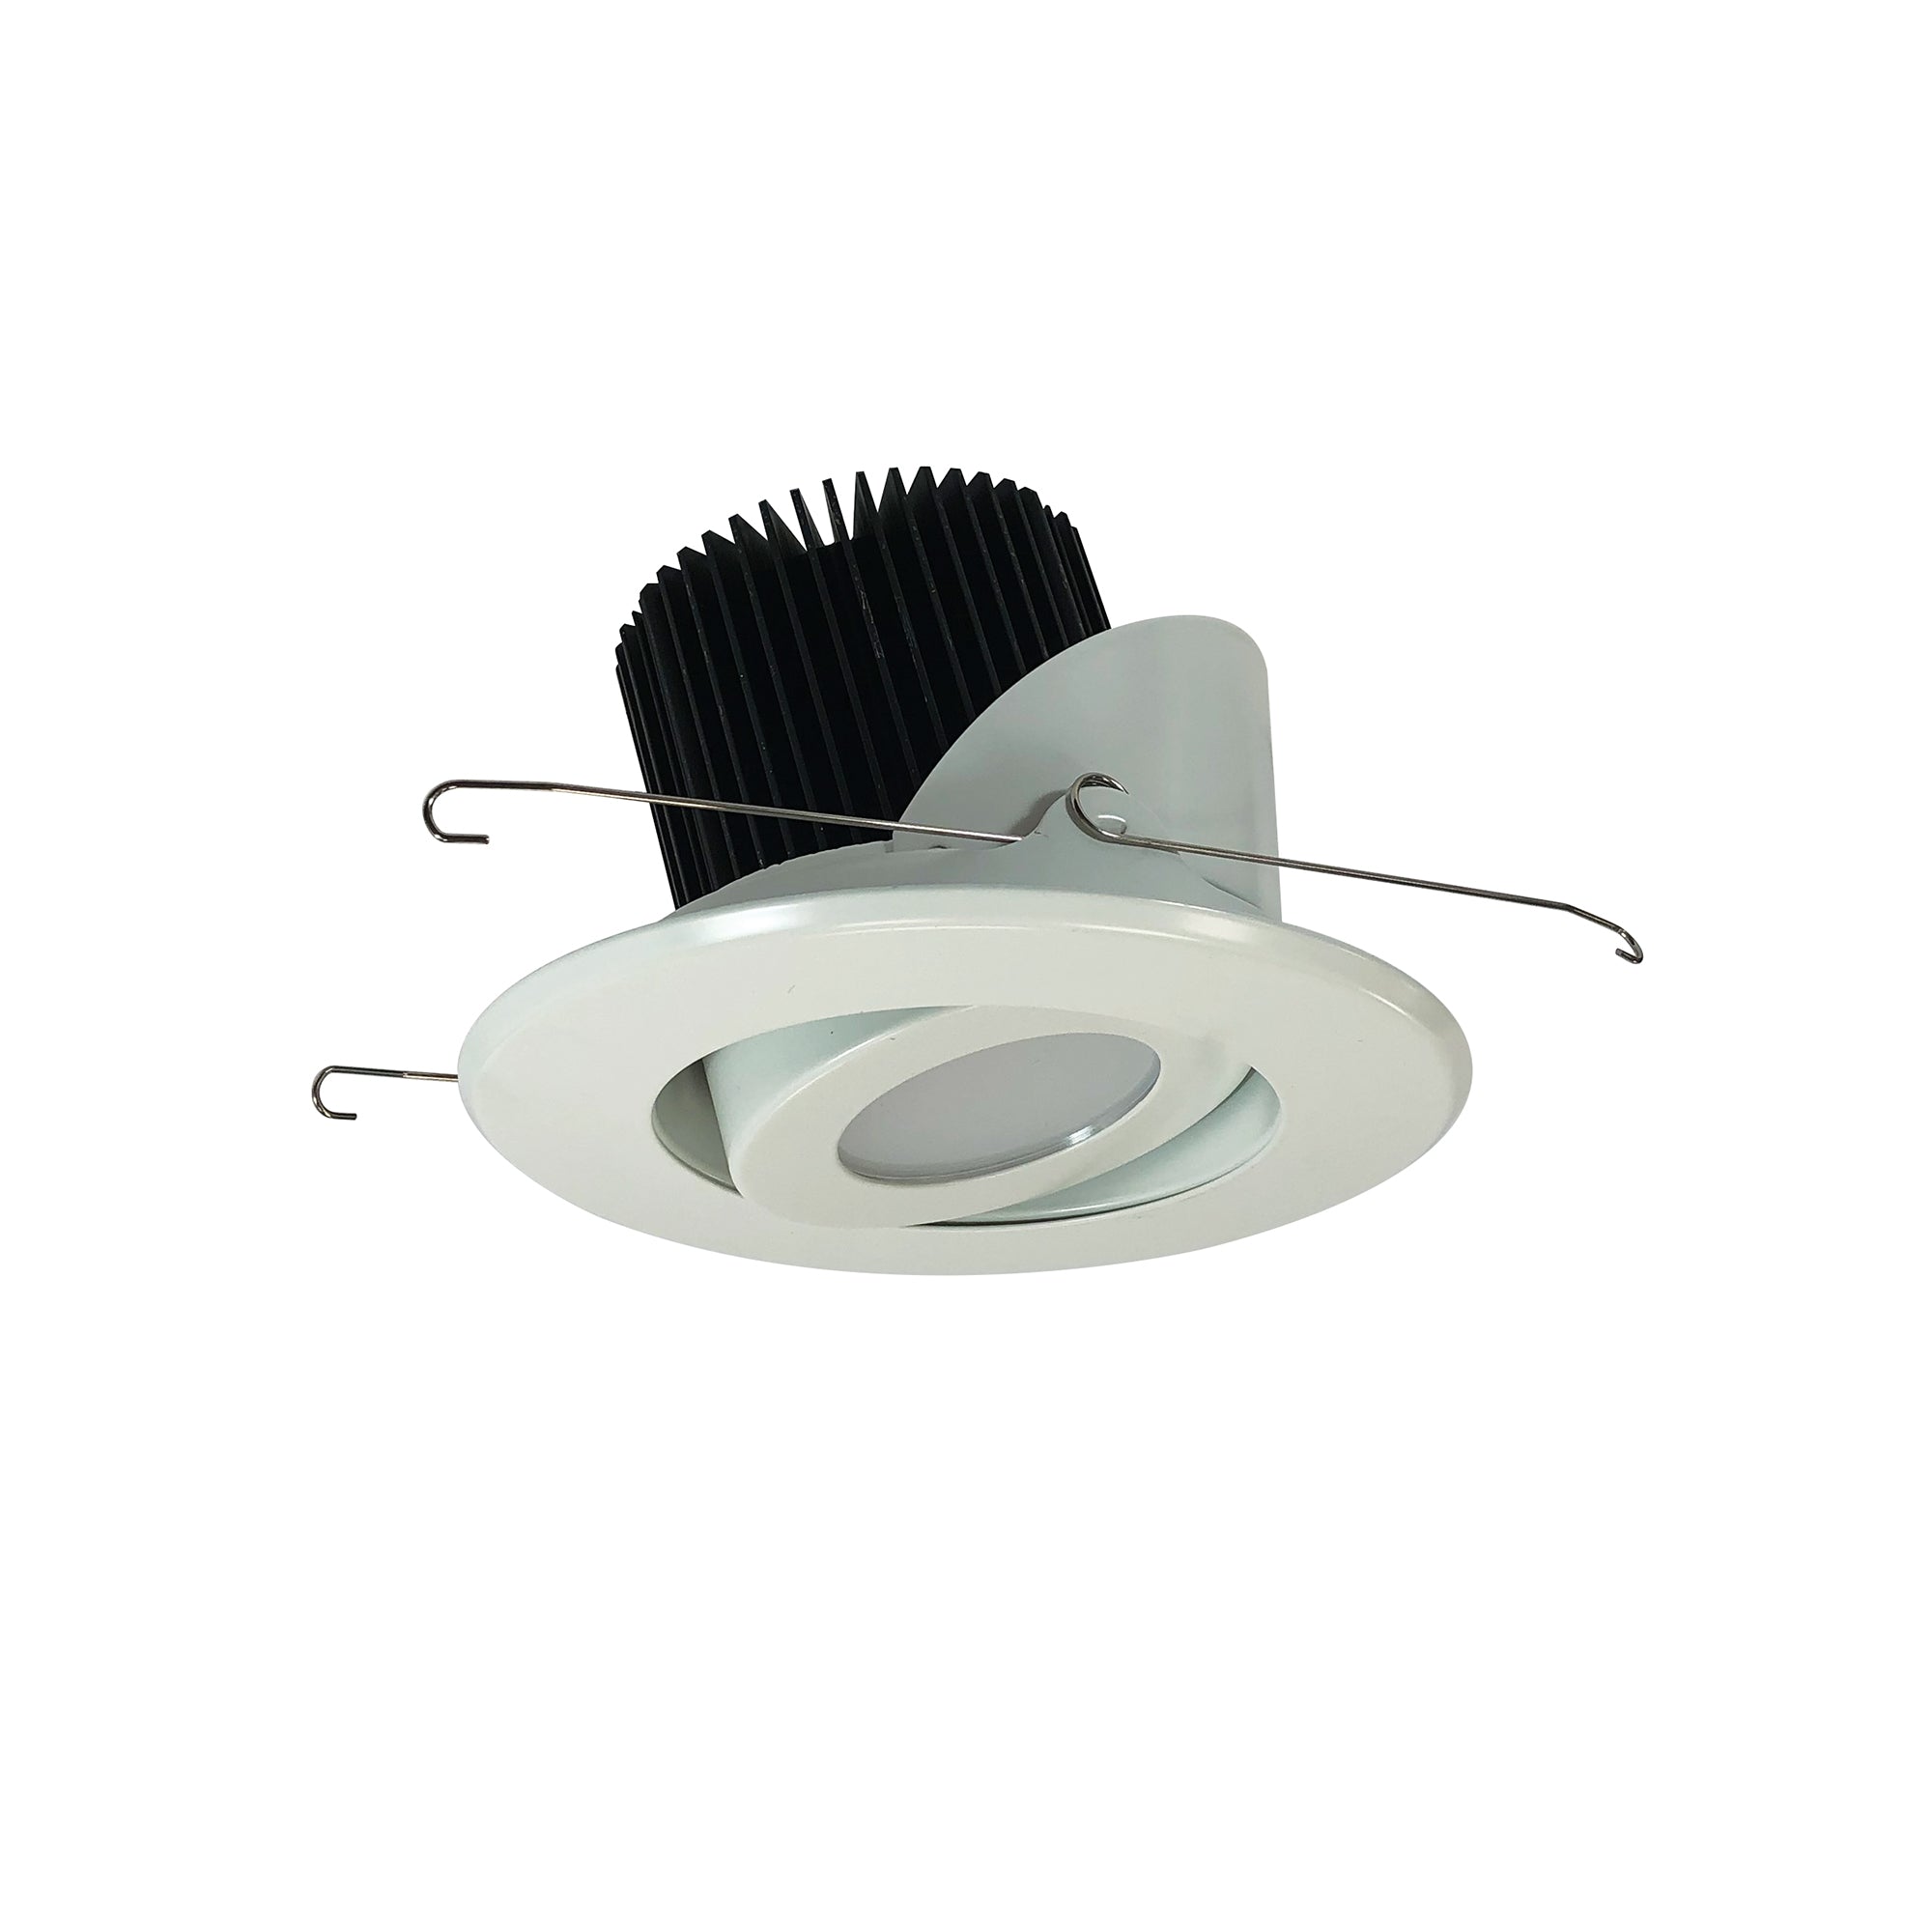 Nora Lighting LE70 - NRM2-514L2530MWW - Recessed - White